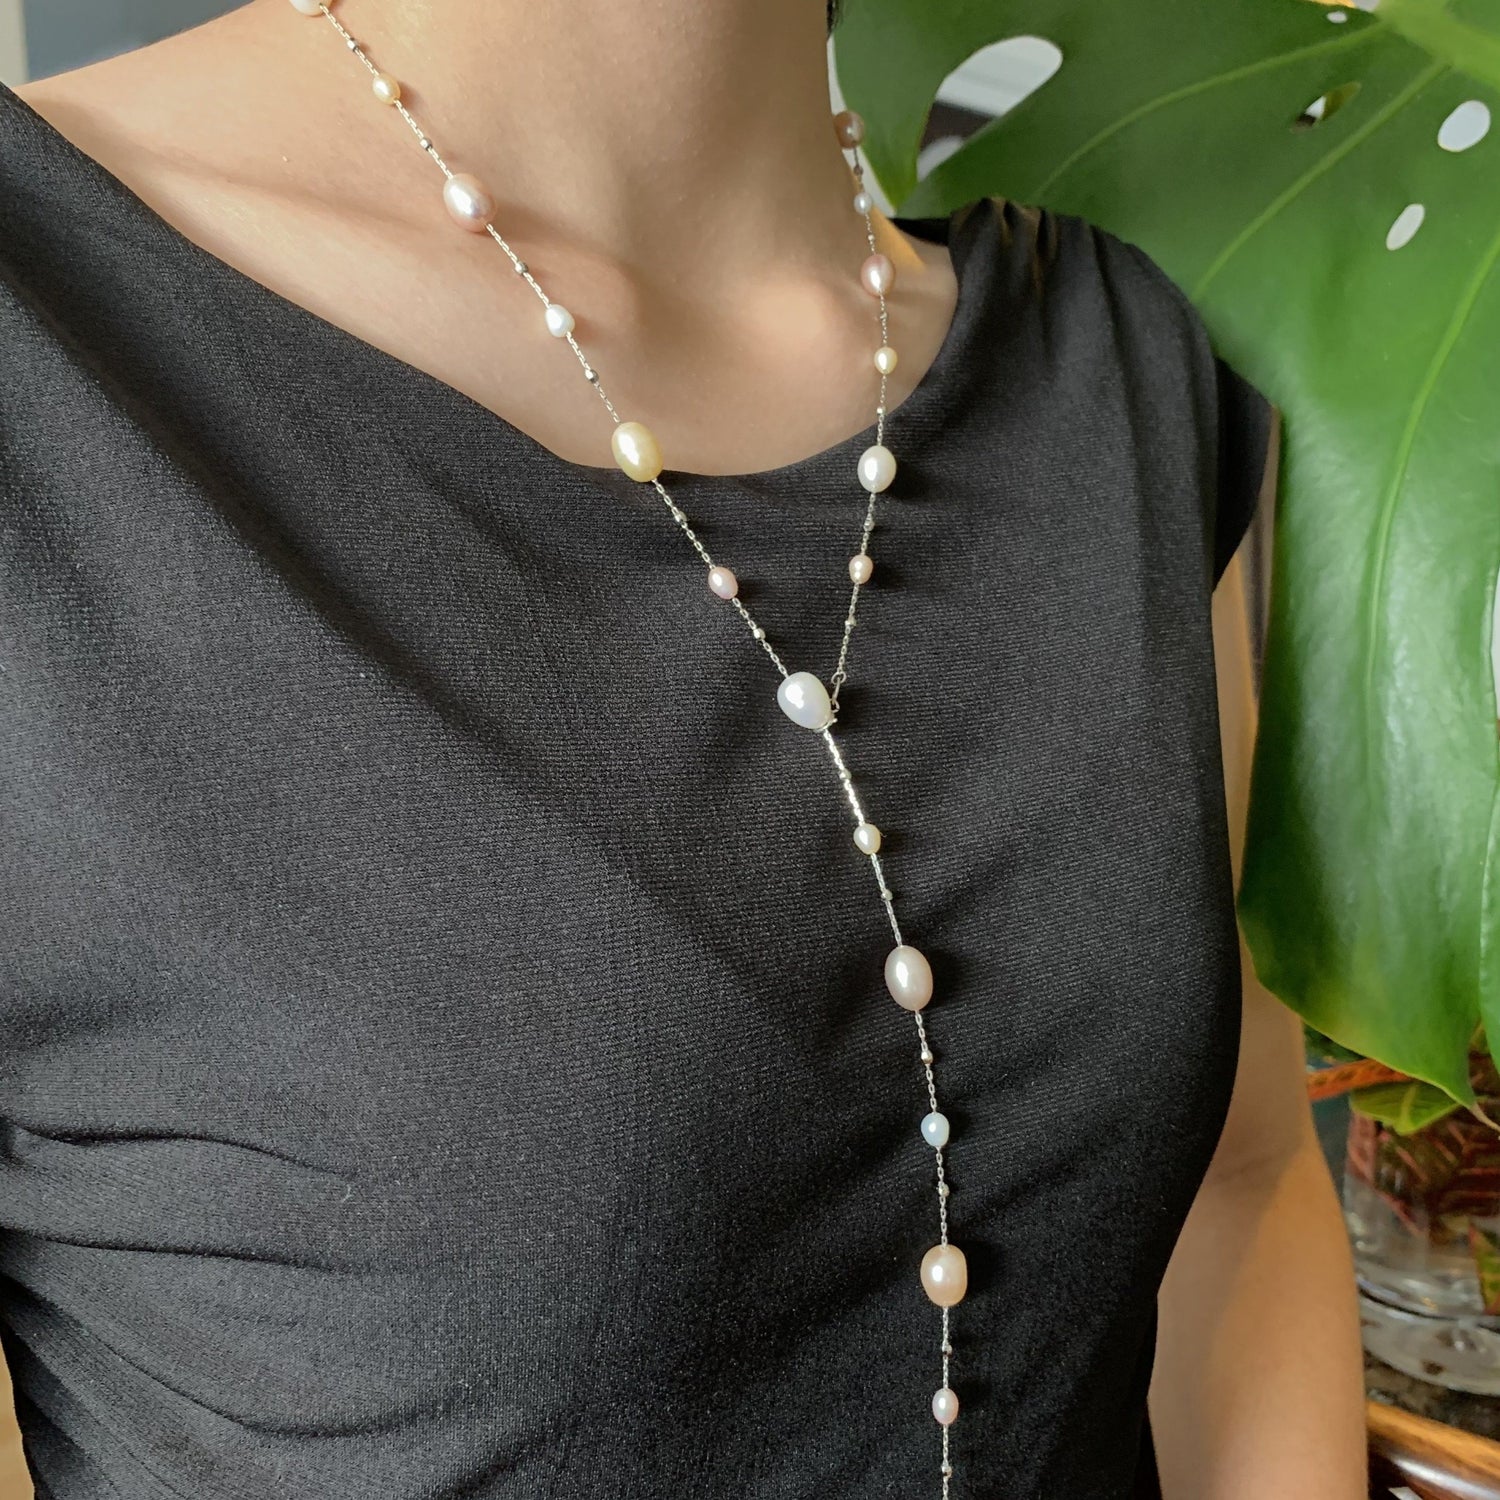 Dew drop freshwater pearl necklace with 36" chain length on model.